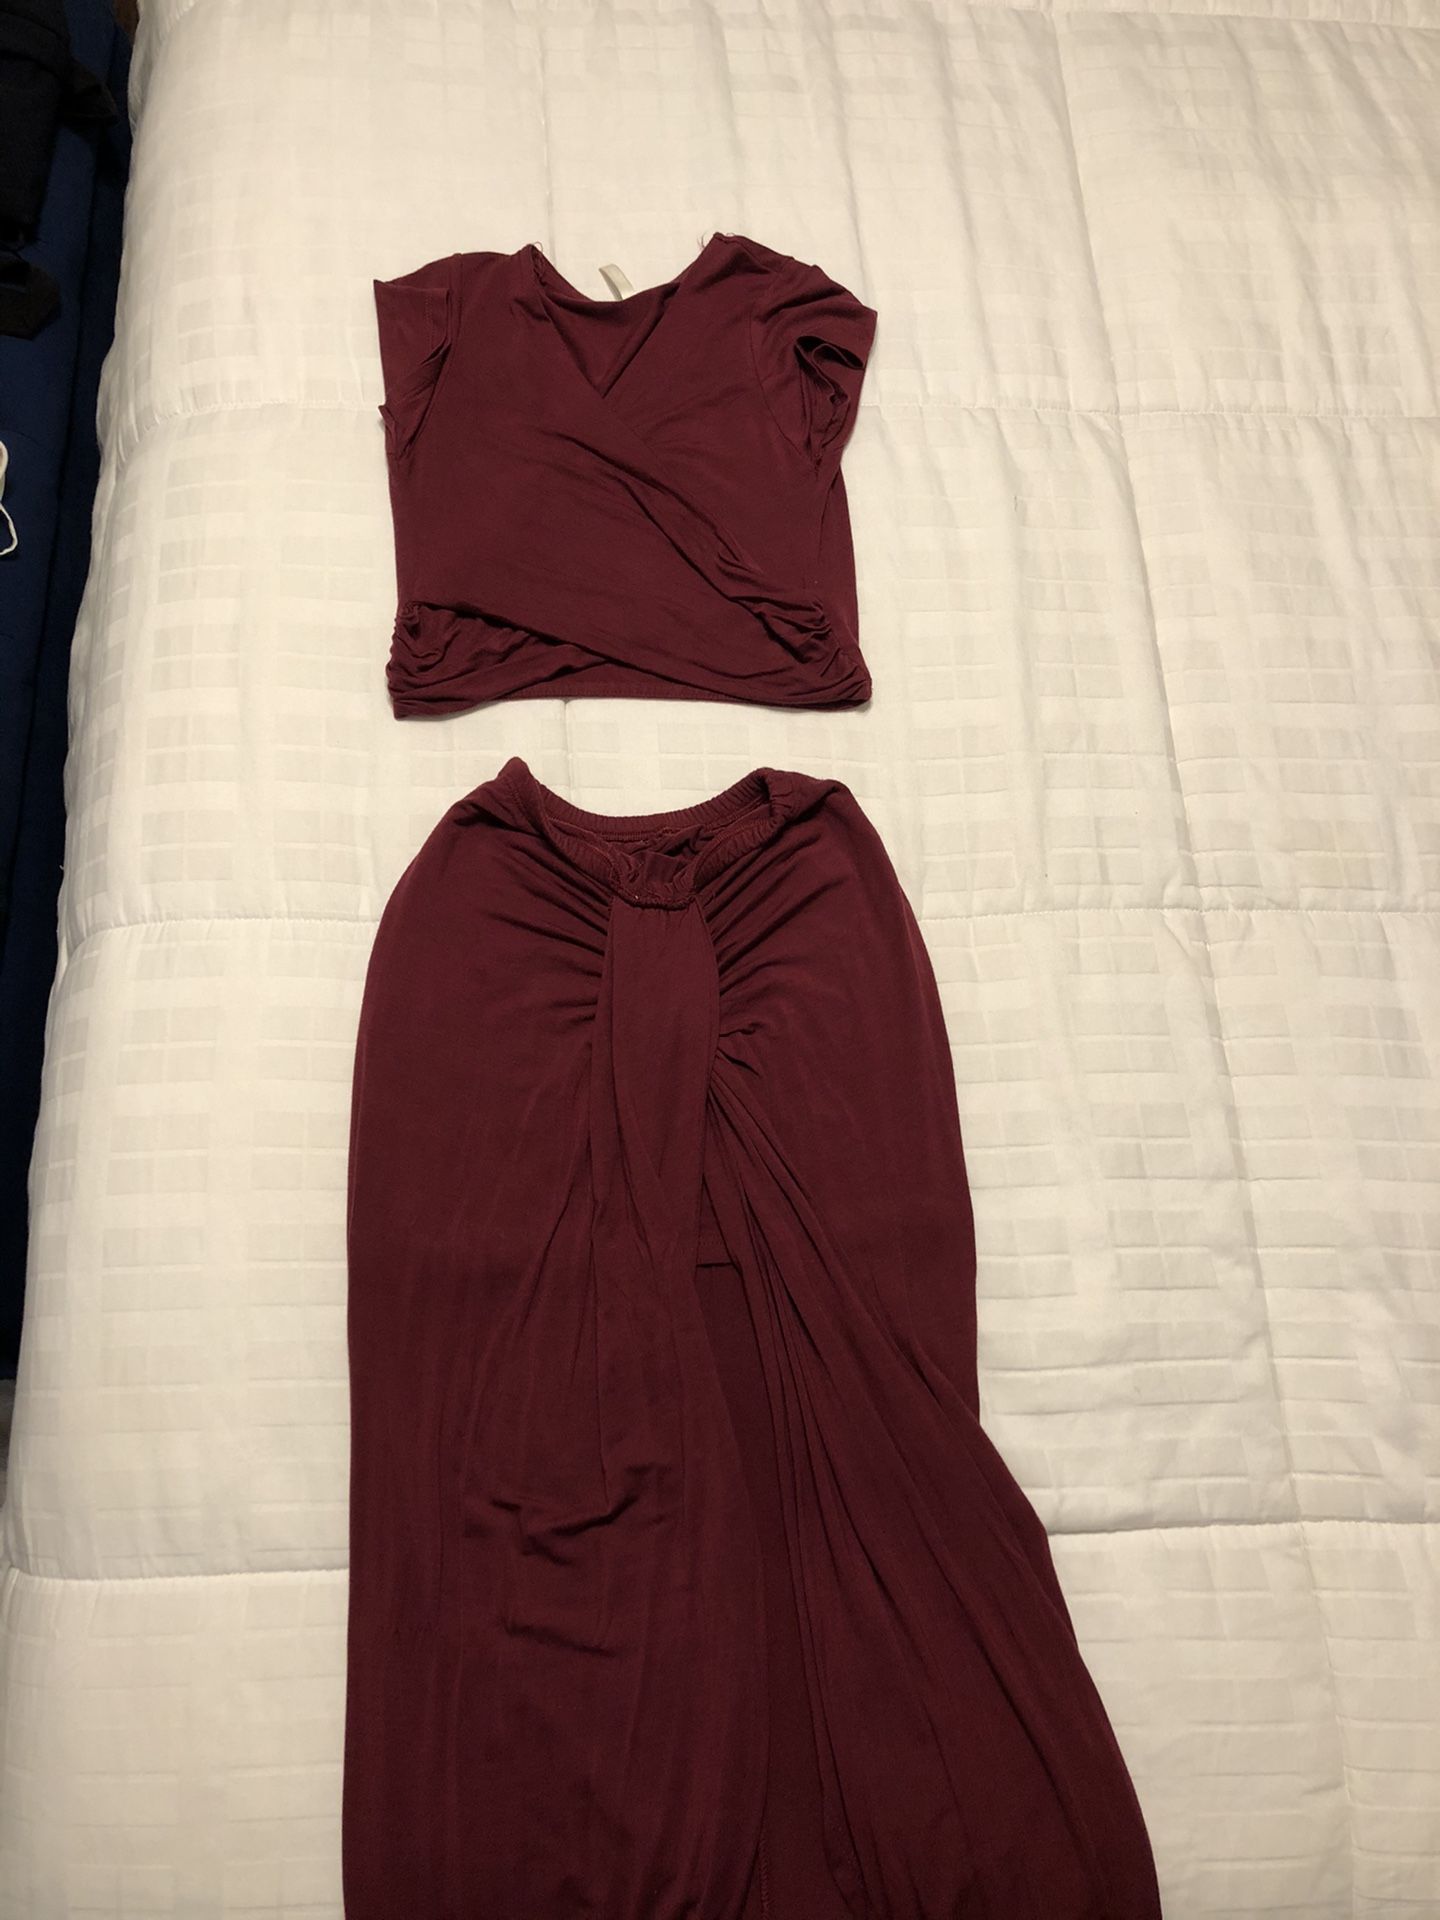 women's clothing small